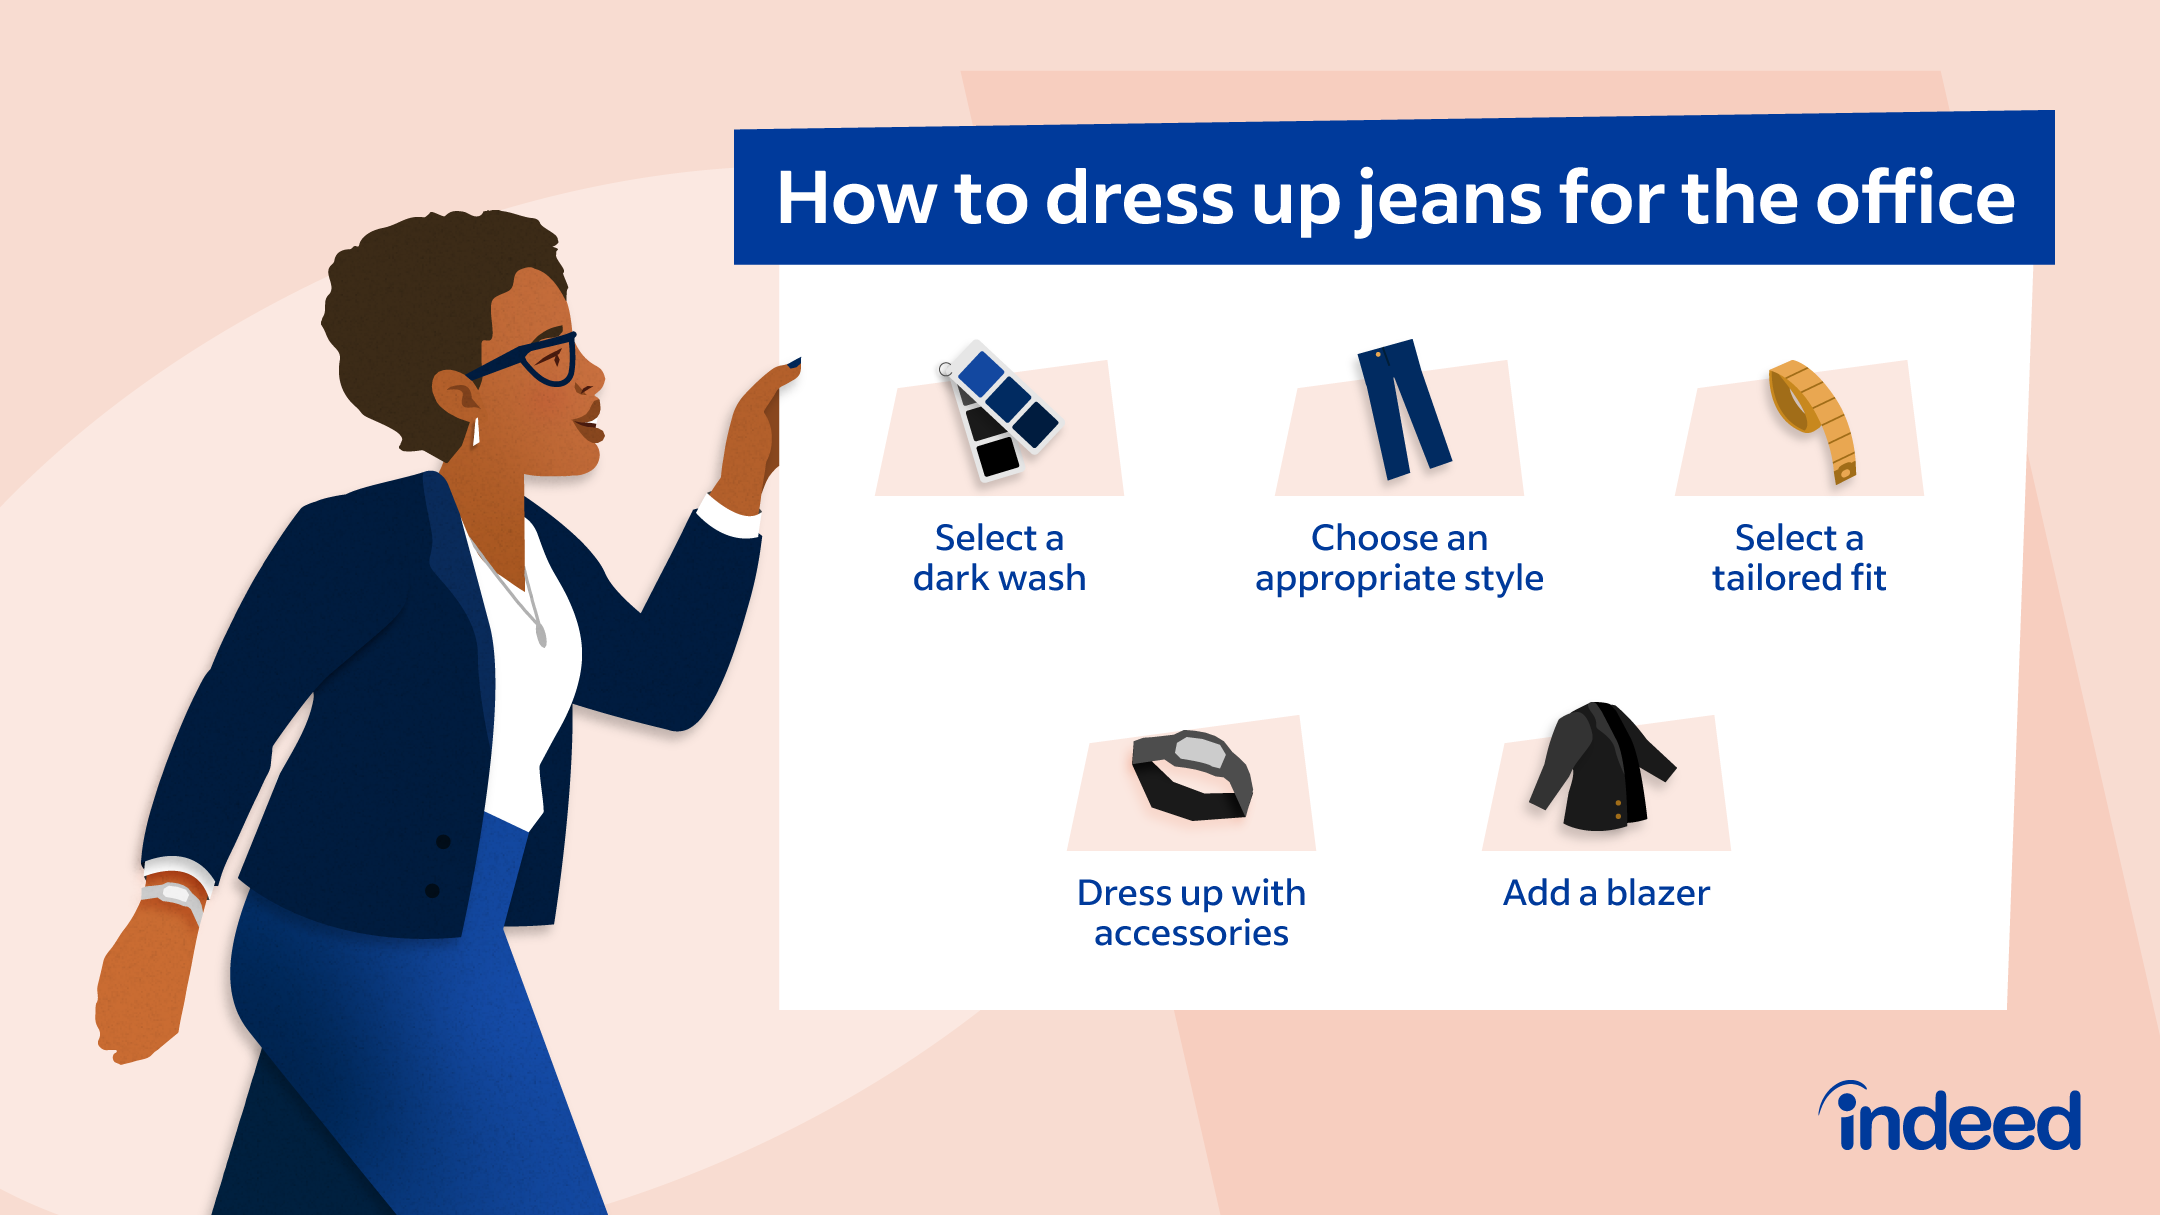 Are Jeans Business Casual? A Guide to Different Work Attire